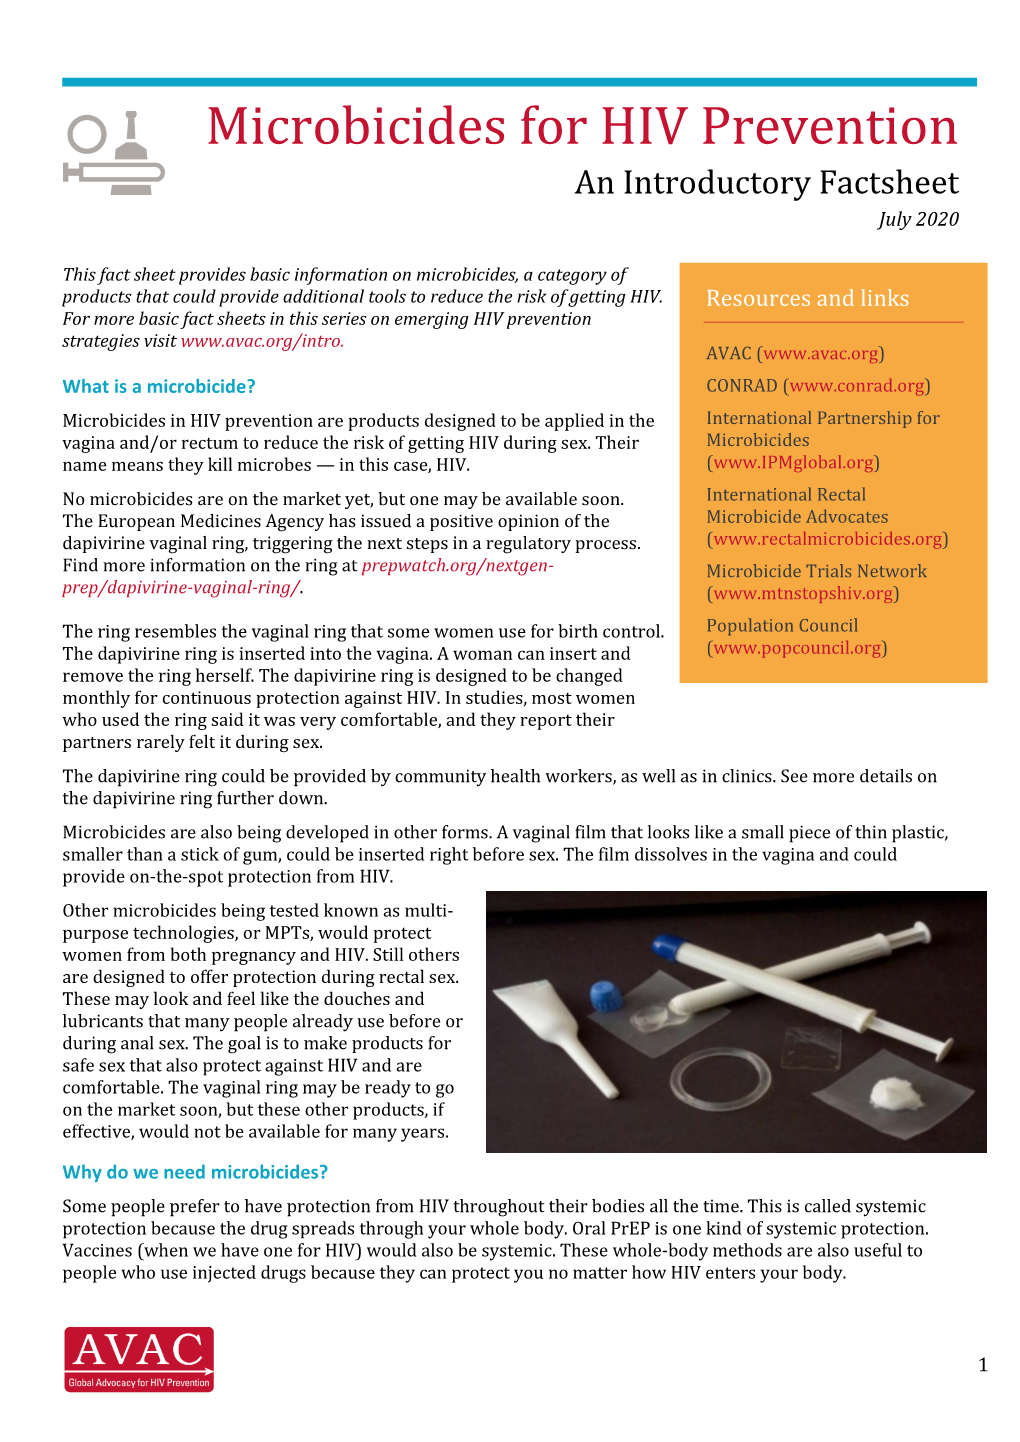 Microbicides for HIV Prevention an Introductory Factsheet July 2020